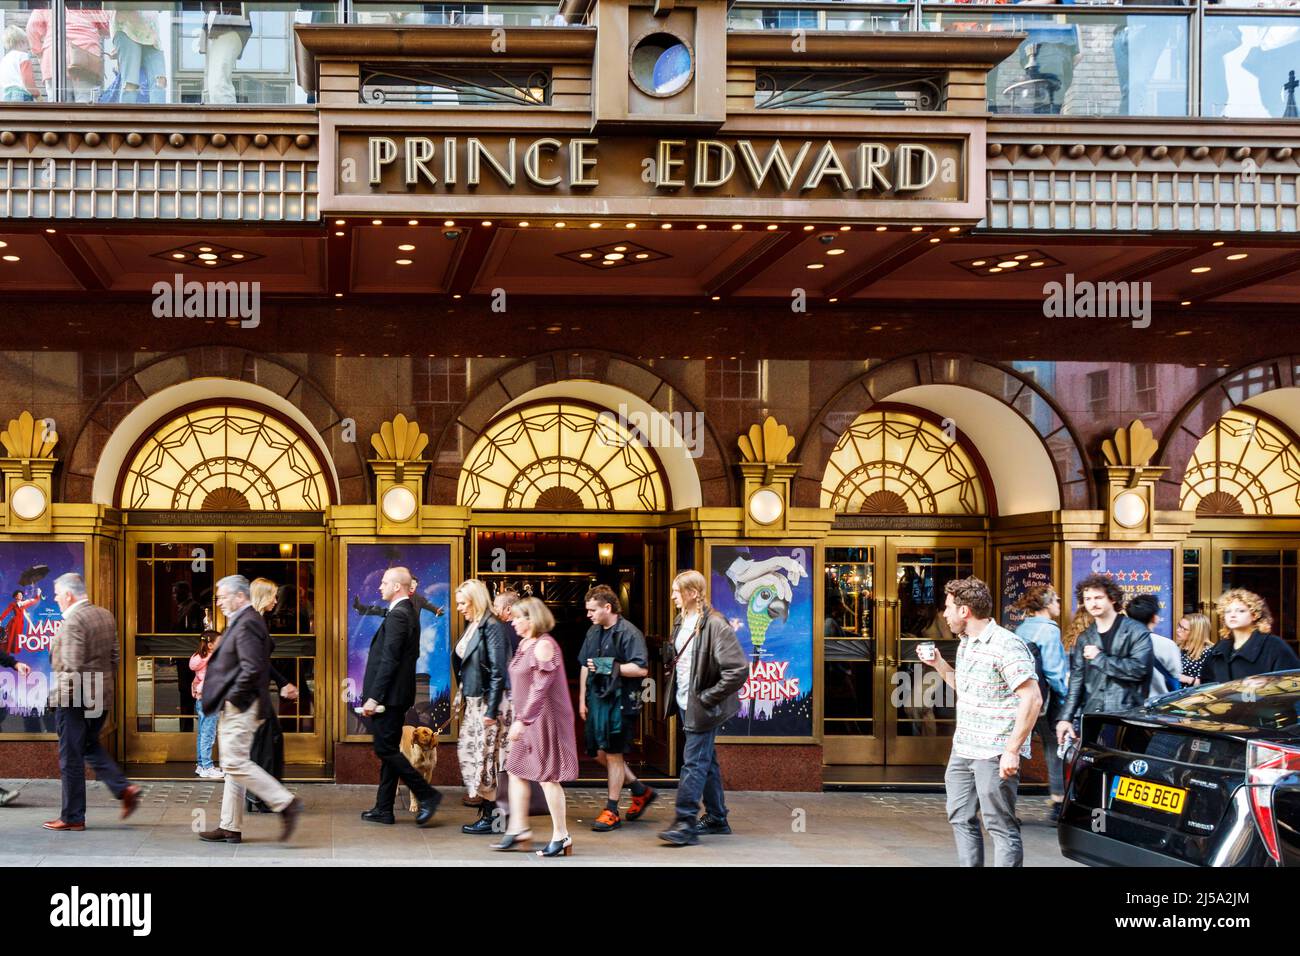 Pedestrians outside the Prince Edward Theatre in Old Compton Street, Soho, showing a stage production of Mary Poppins, London, UK Stock Photo